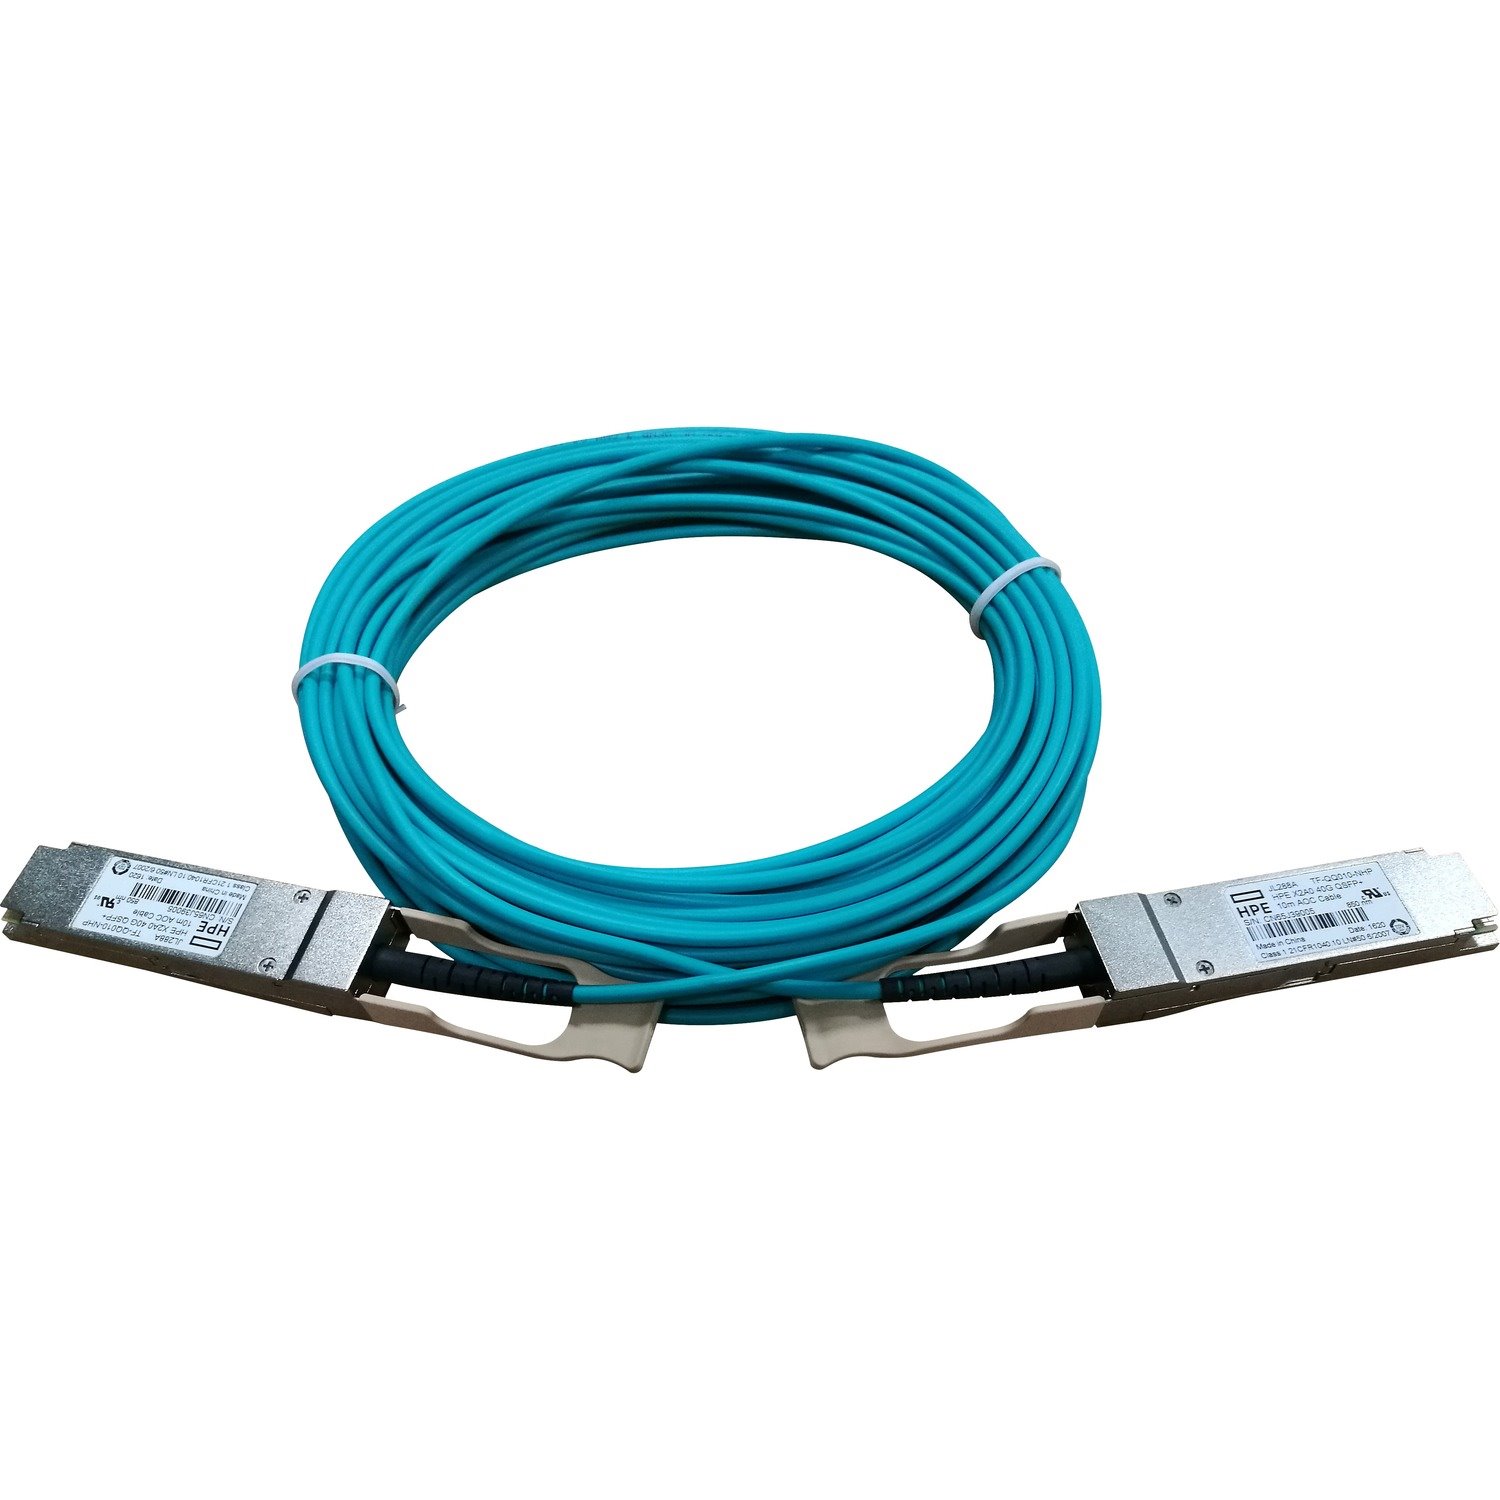 HPE X2A0 10 m Fibre Optic Network Cable for Network Device, Switch - 1